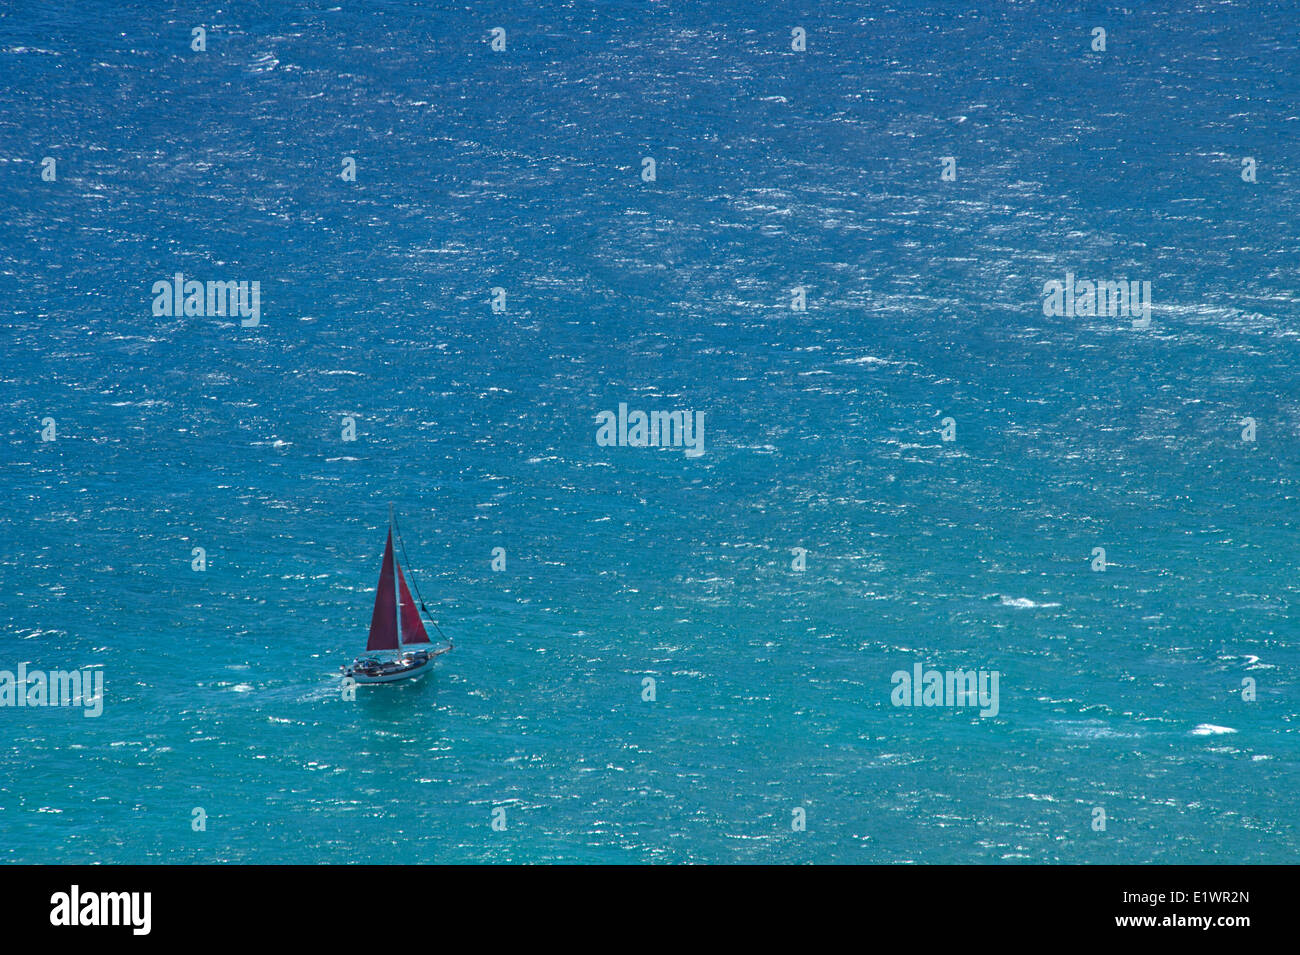 Small yacht sailing in open ocean Stock Photo